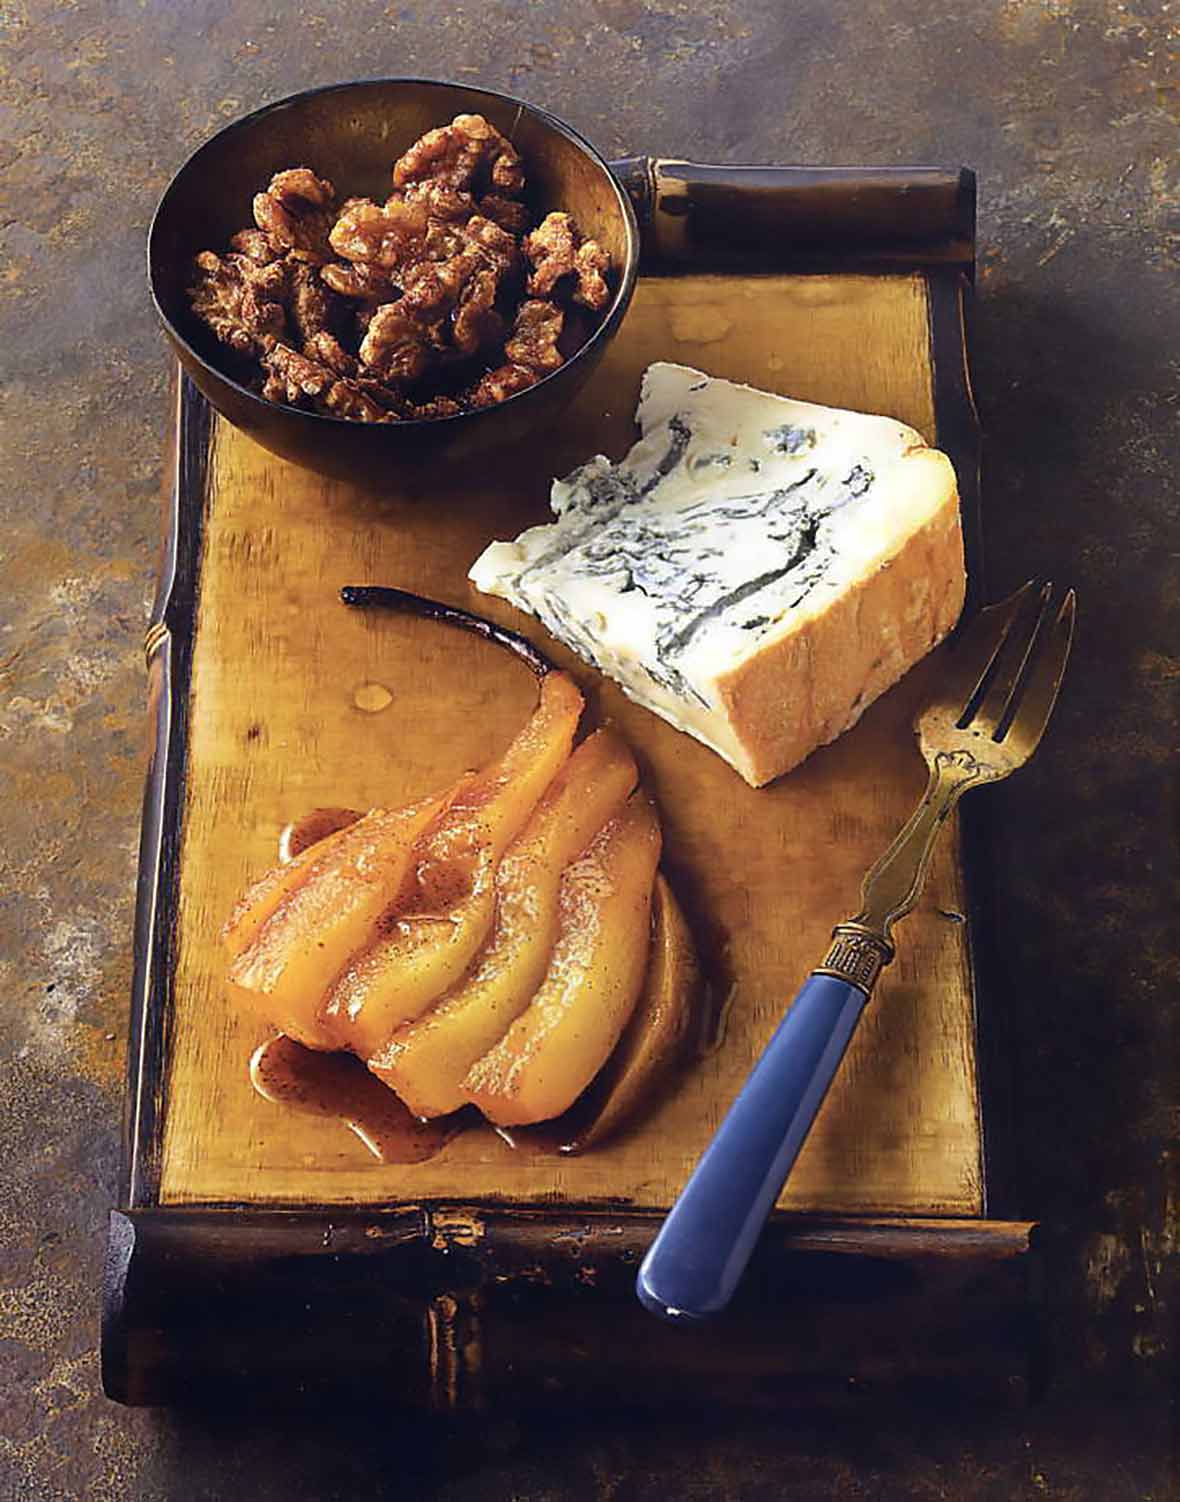 A slab of Gorgonzola dolce on a wooden cutting board with a fanned, roasted pear, and a bowl of spiced walnuts.